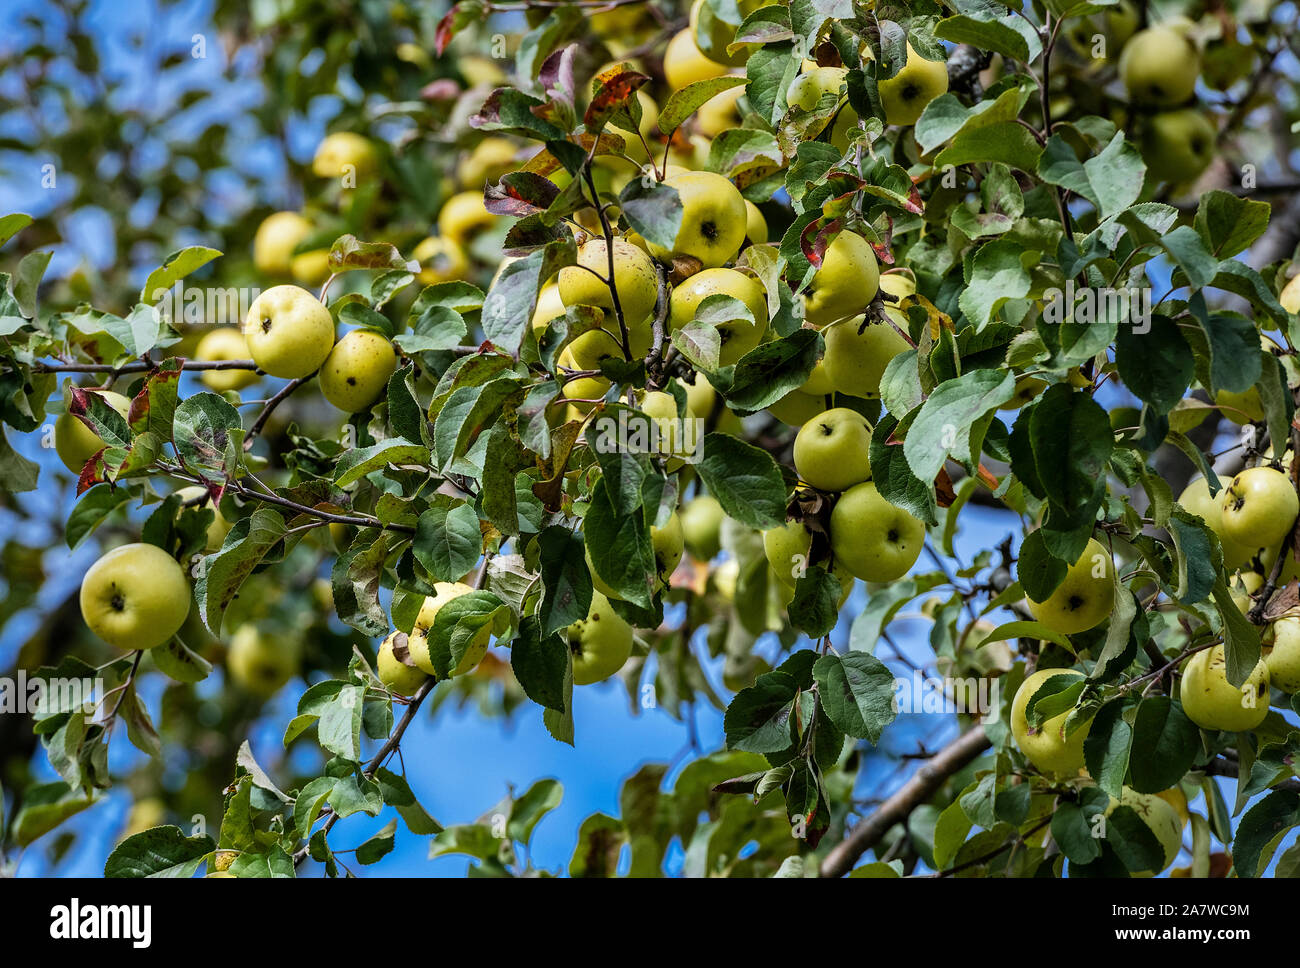 Ripe green apples on the tree, Vermont, USA. Stock Photo